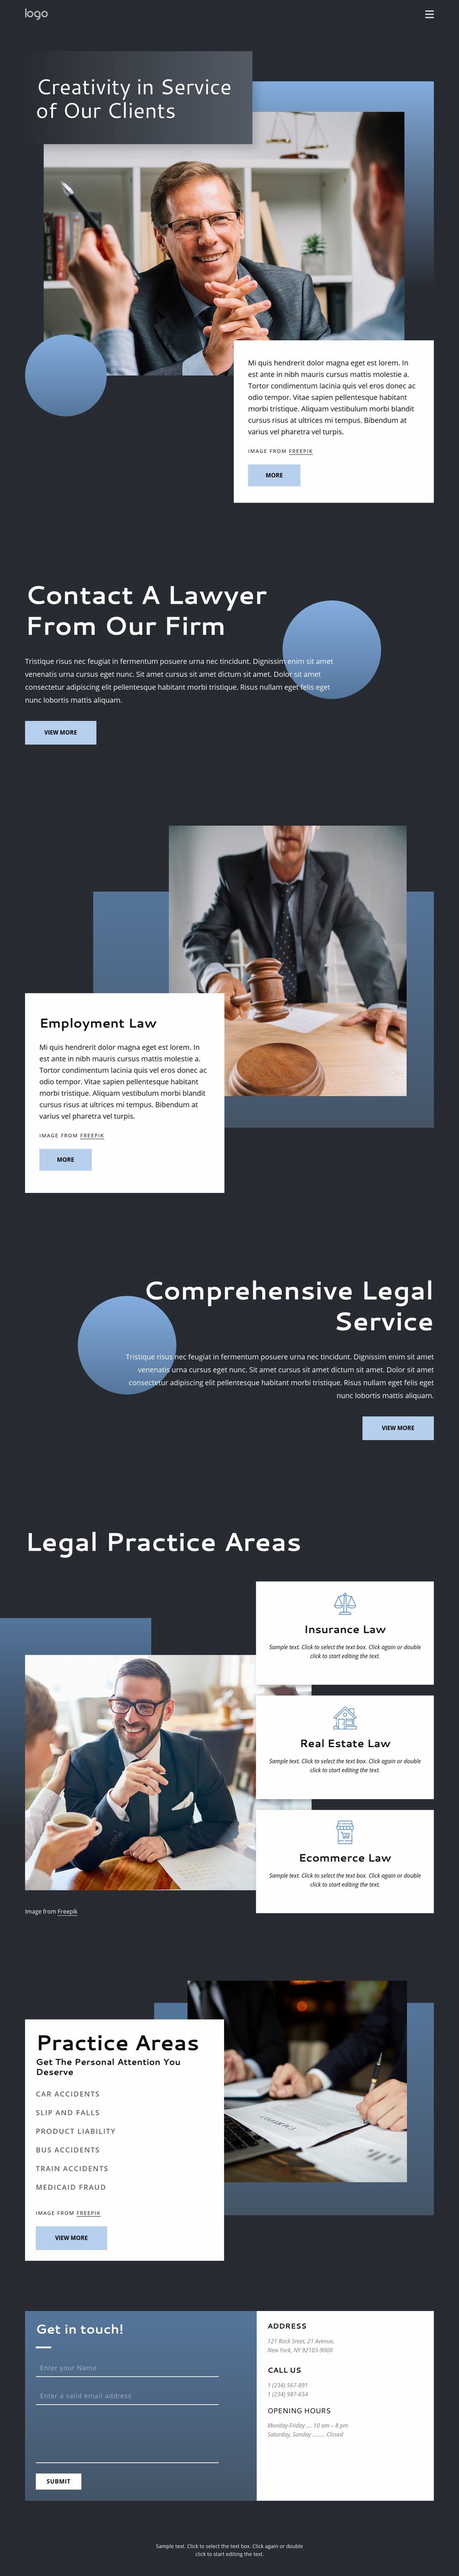 Experienced legal advice Web Page Design